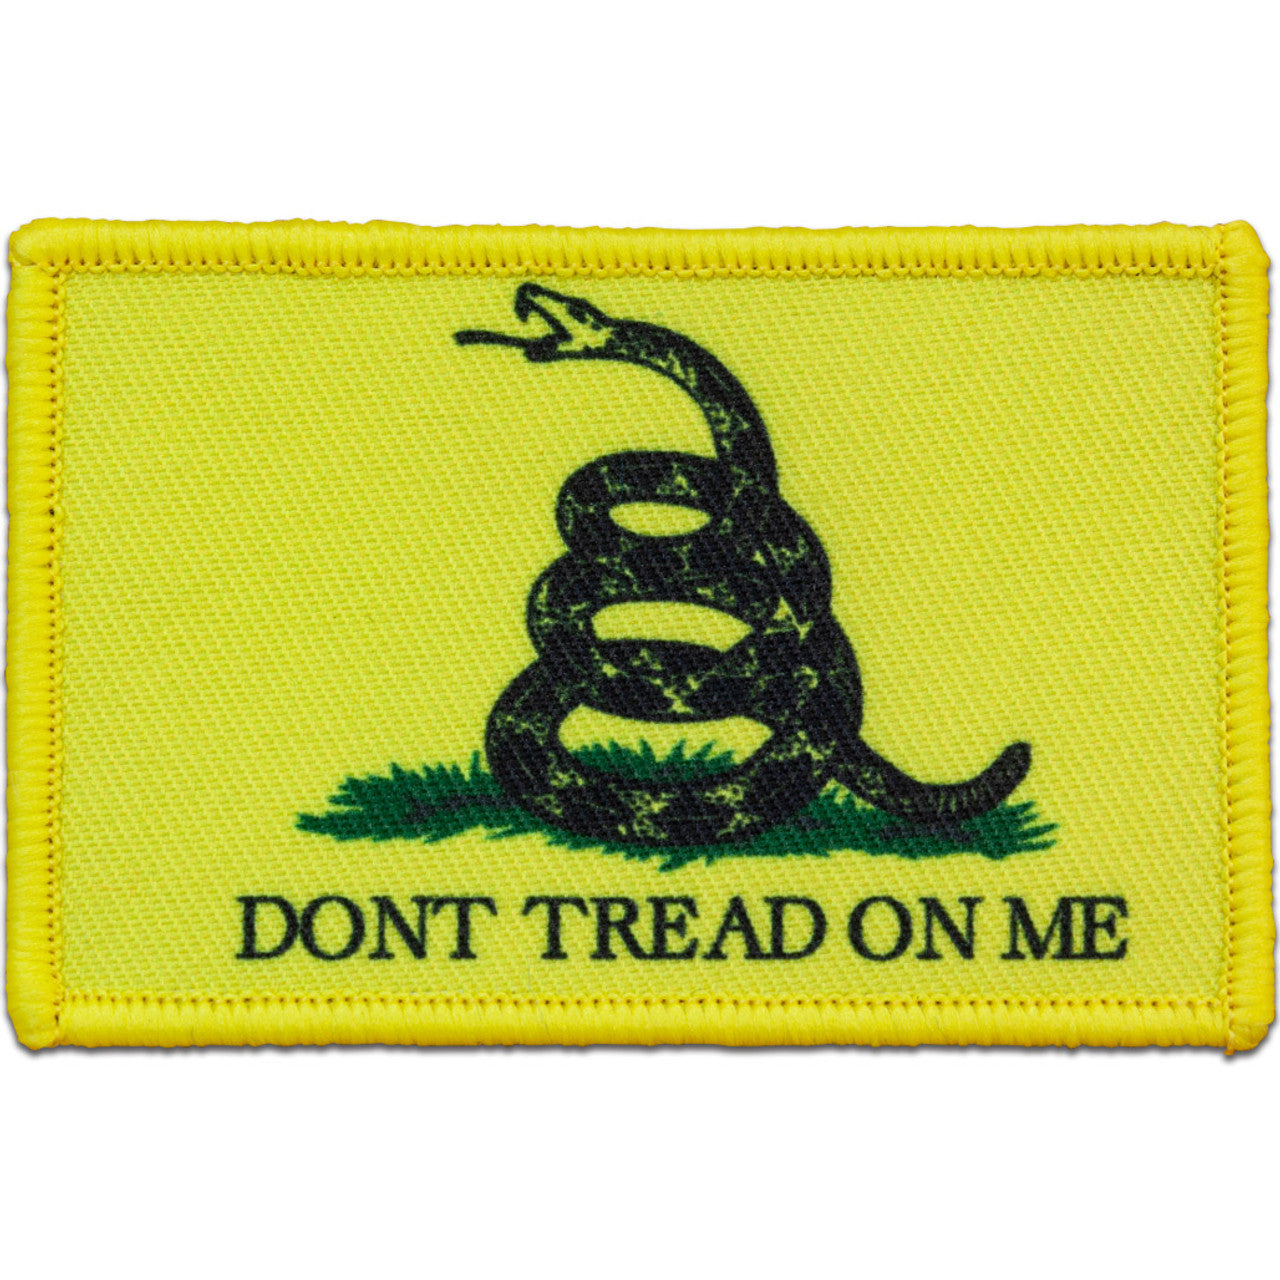 "DONT TREAD ON ME" MORALE PATCH